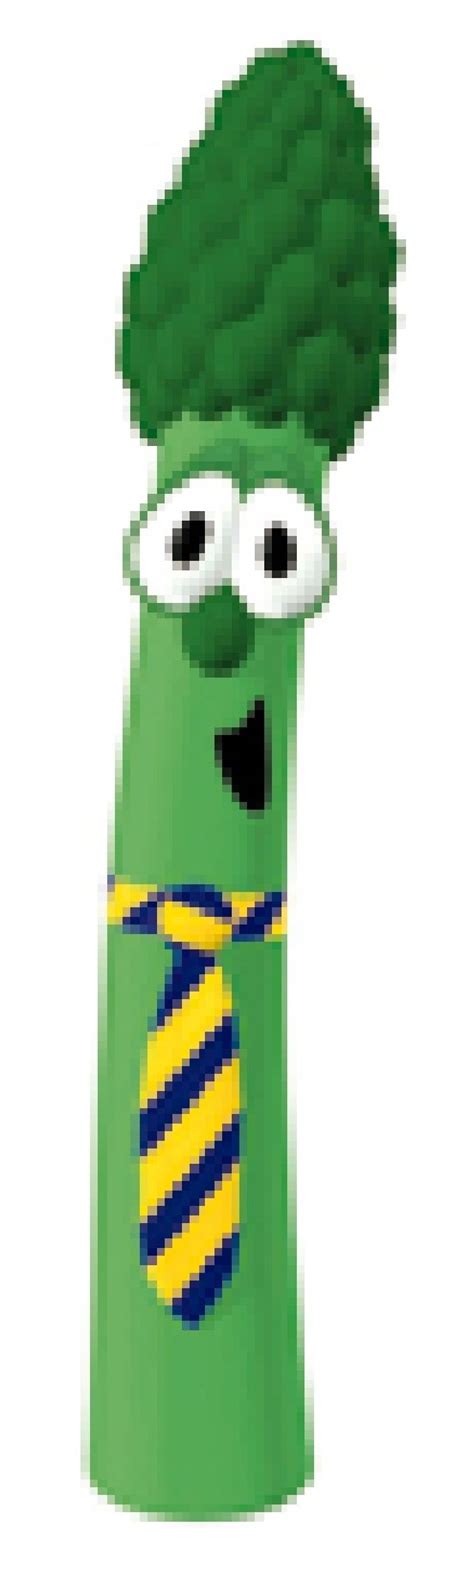 Mike asparagus. Archibald "Archie" Asparagus is one of the main characters from the VeggieTales franchise. Archibald first appeared in VeggieTales Promo: Take 38. He at this point was an unnamed snooty British asparagus who criticized the idea of VeggieTales being a children's show. He wasn't named Archibald until Where's God When I'm S-Scared?, where he bashes Larry singing silly songs and is the actor of ... 